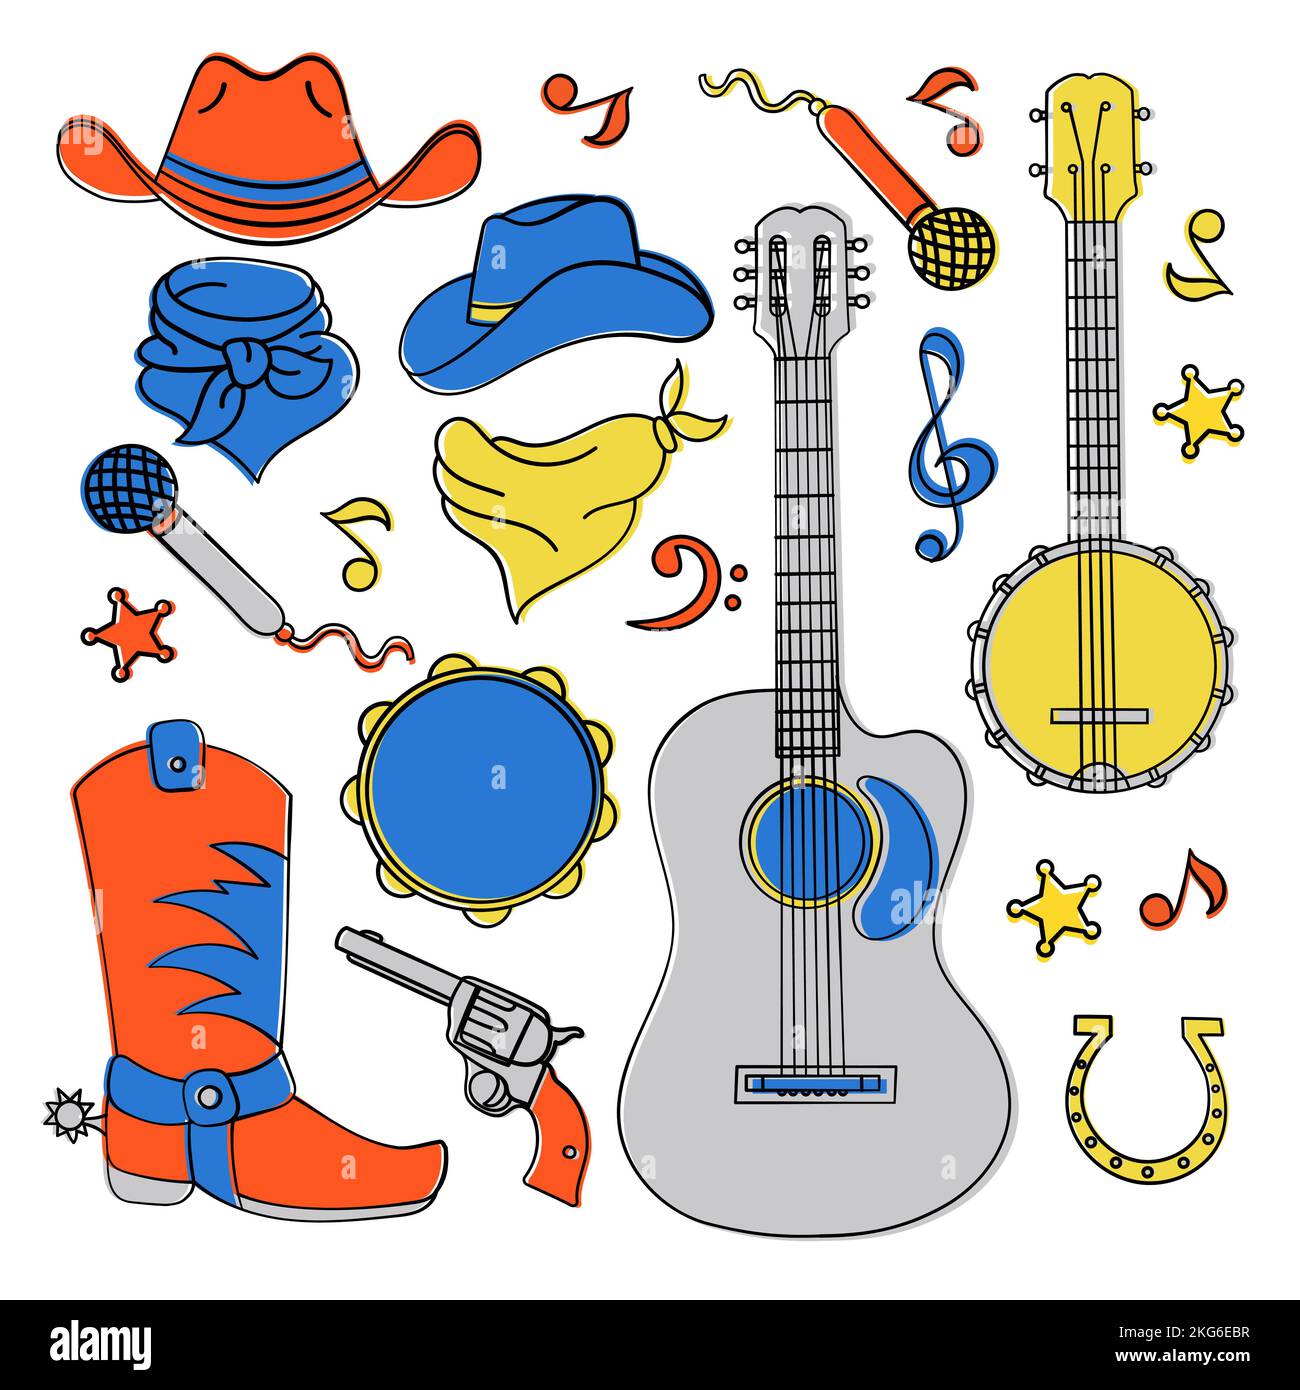 COUNTRY MUSIC BAND American Cowboy Western Festival Vector Illustration Set For Print Stock Vector